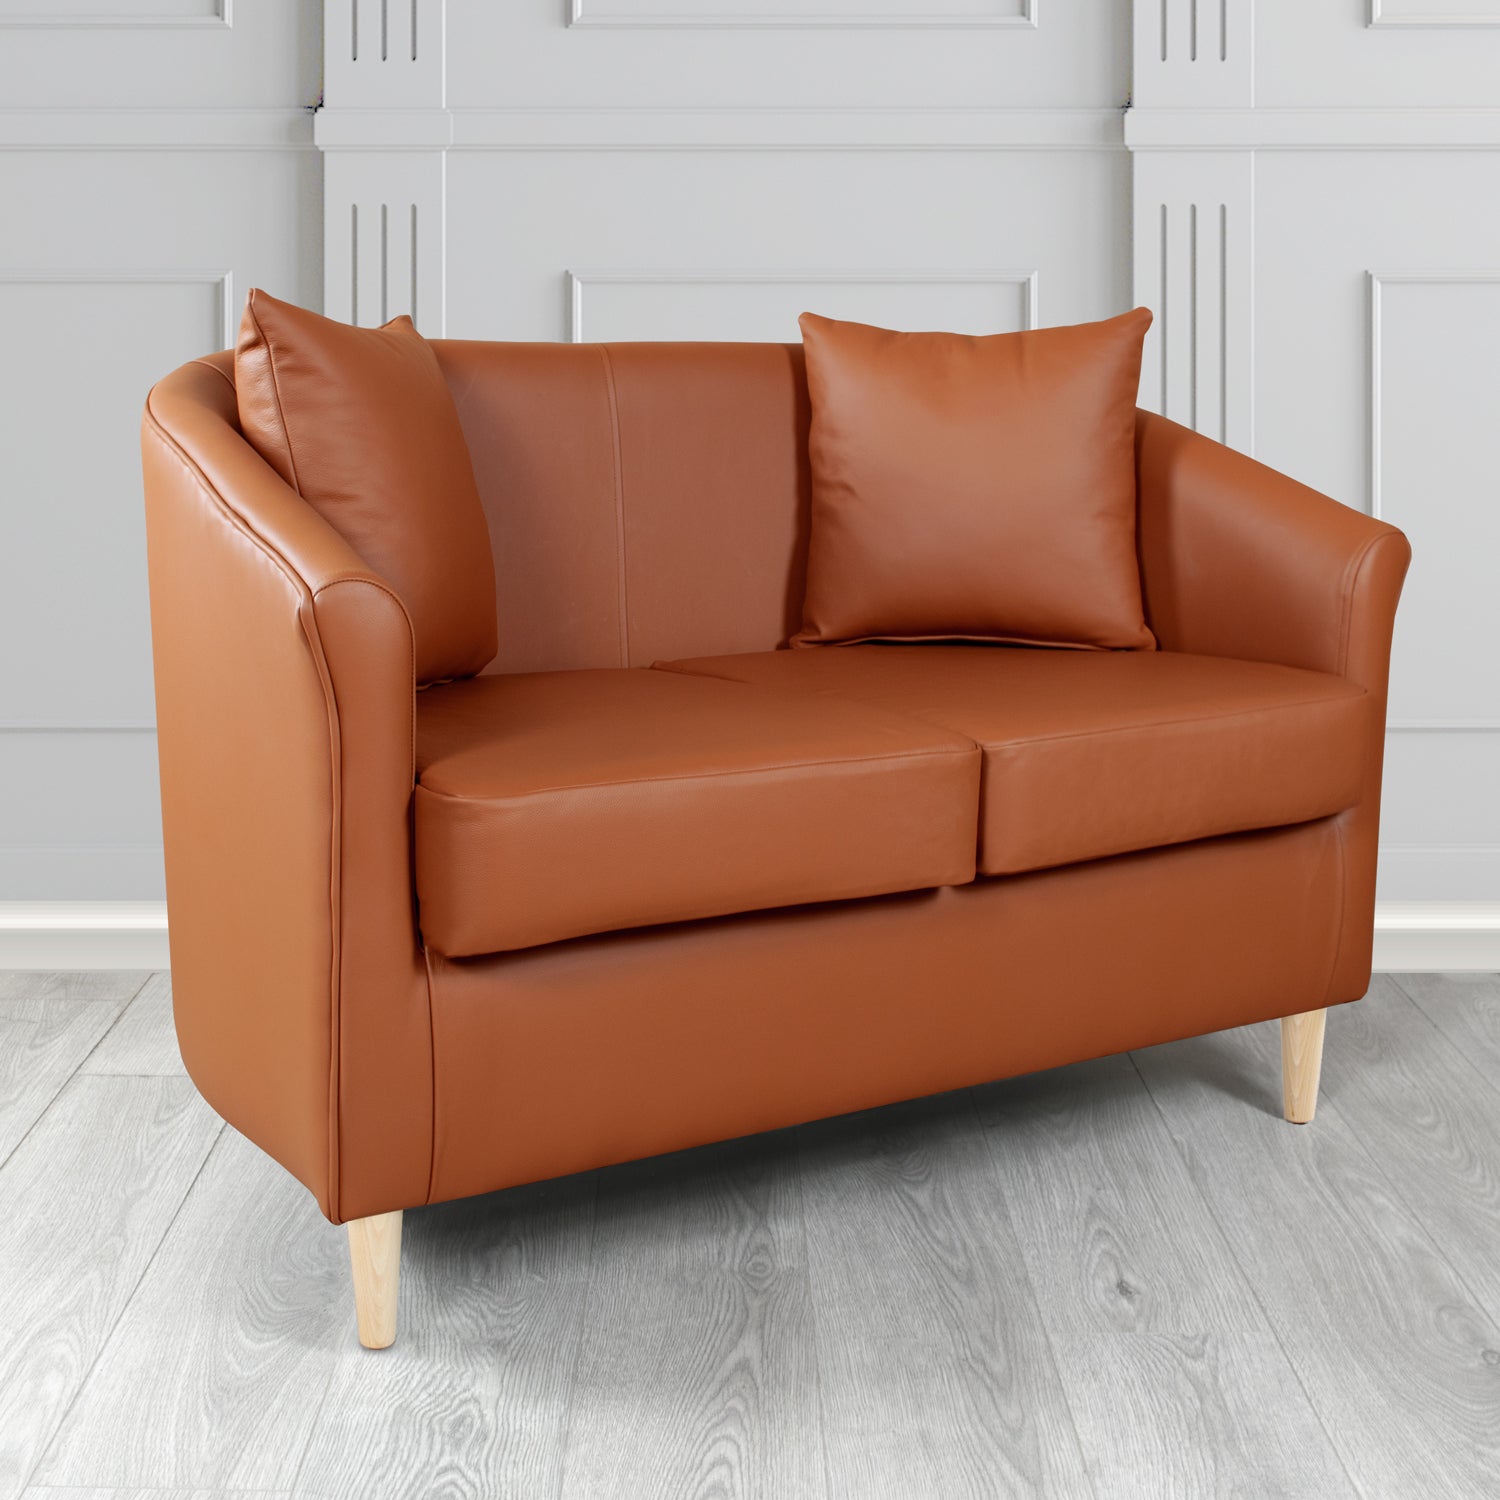 St Tropez Shelly Spice Crib 5 Genuine Leather 2 Seater Tub Sofa with Scatter Cushions - The Tub Chair Shop